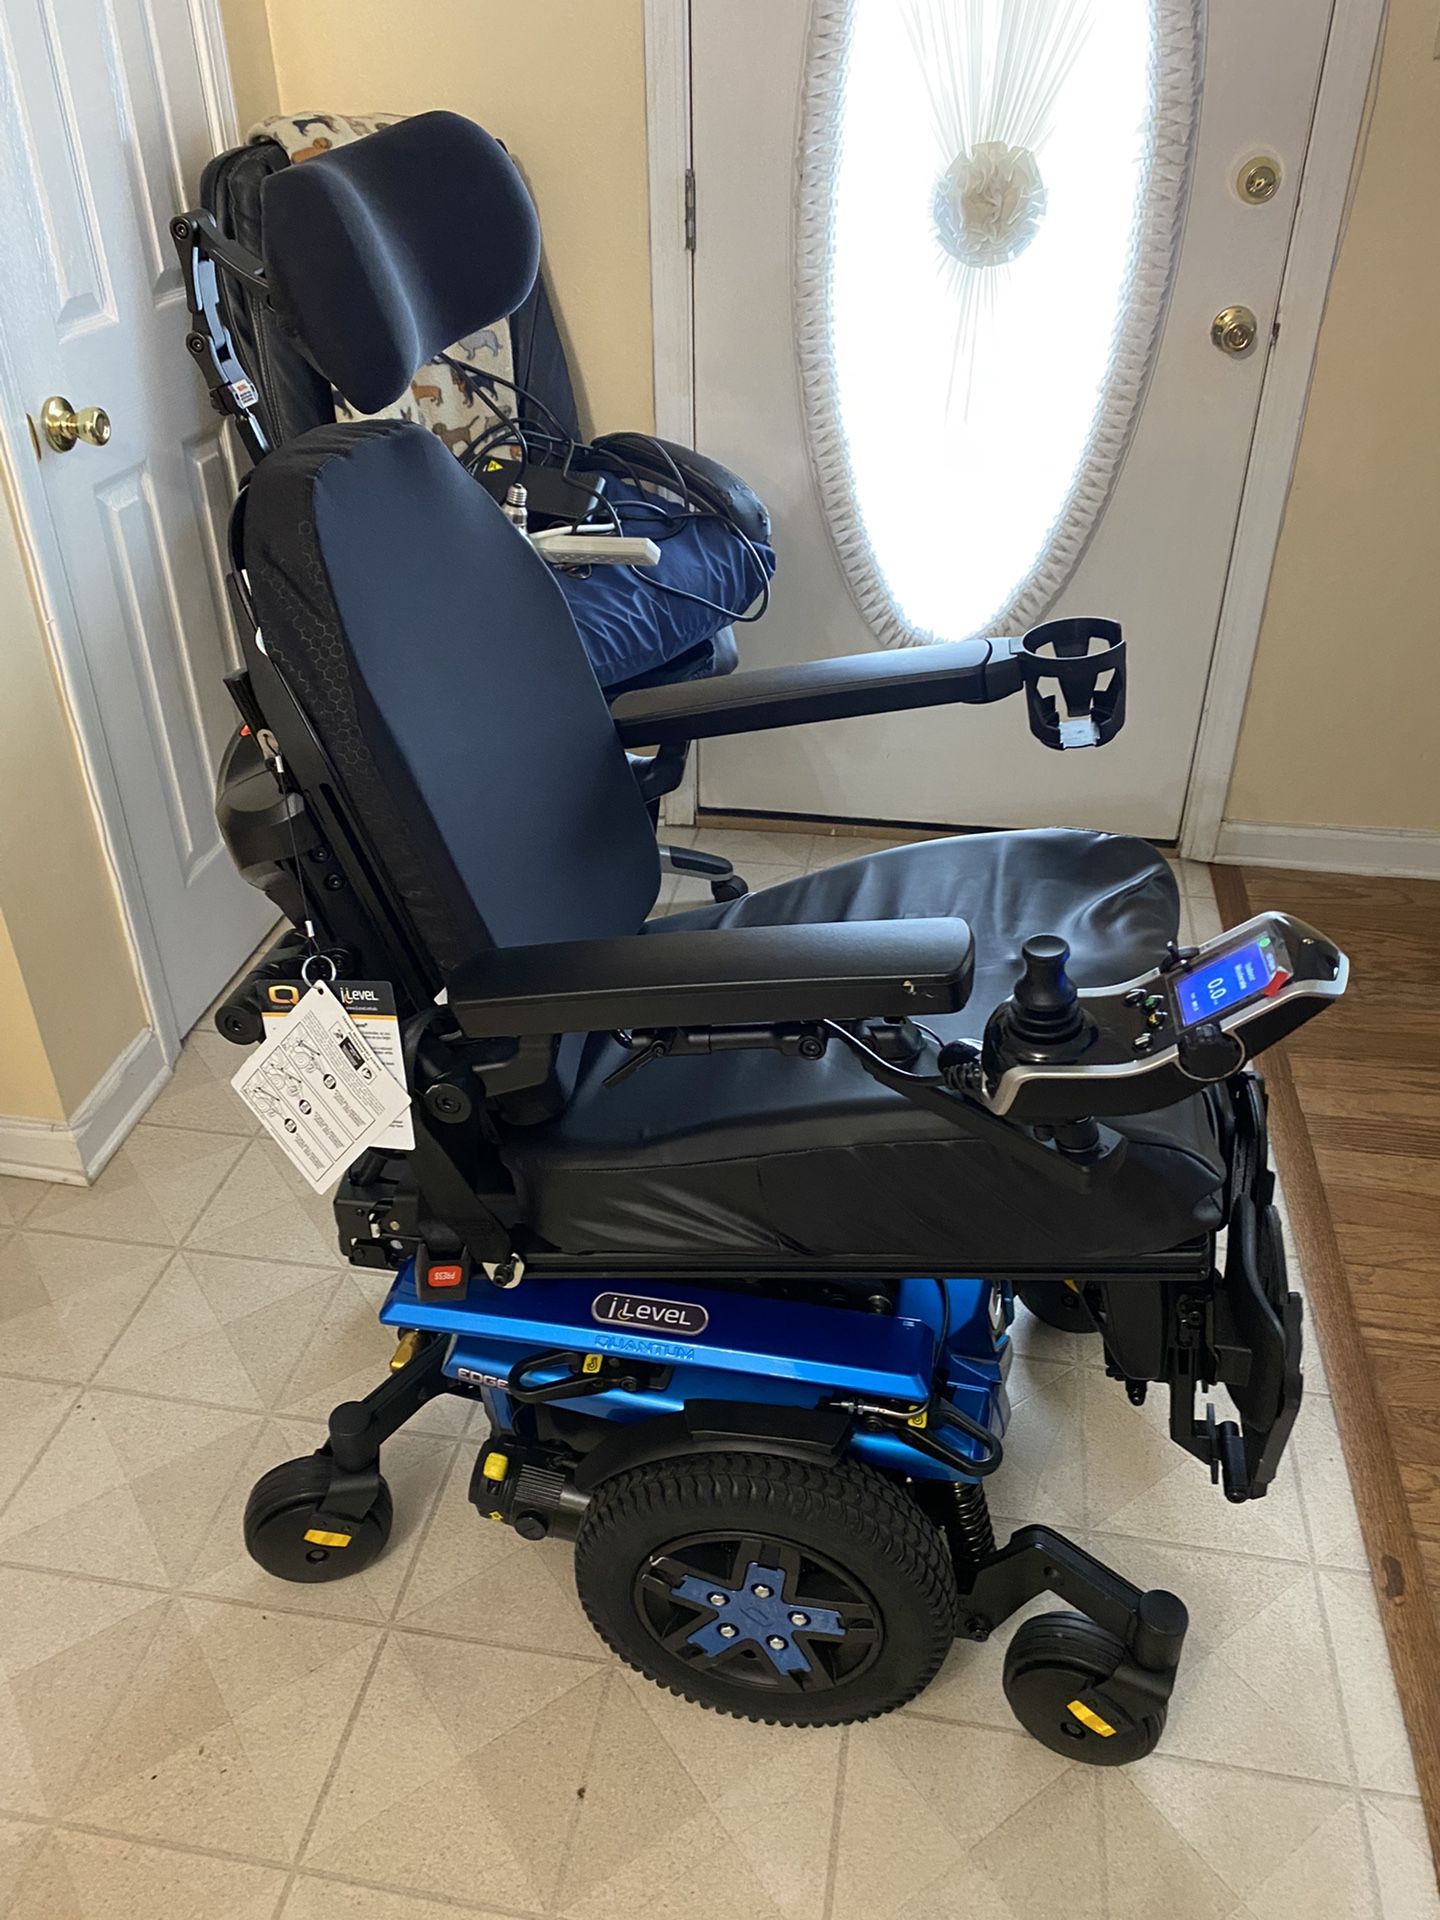 Quantum Q3 Edge Power wheelchair, Elevated Legs And Oxygen Tank Holder, contact Info (contact info removed)